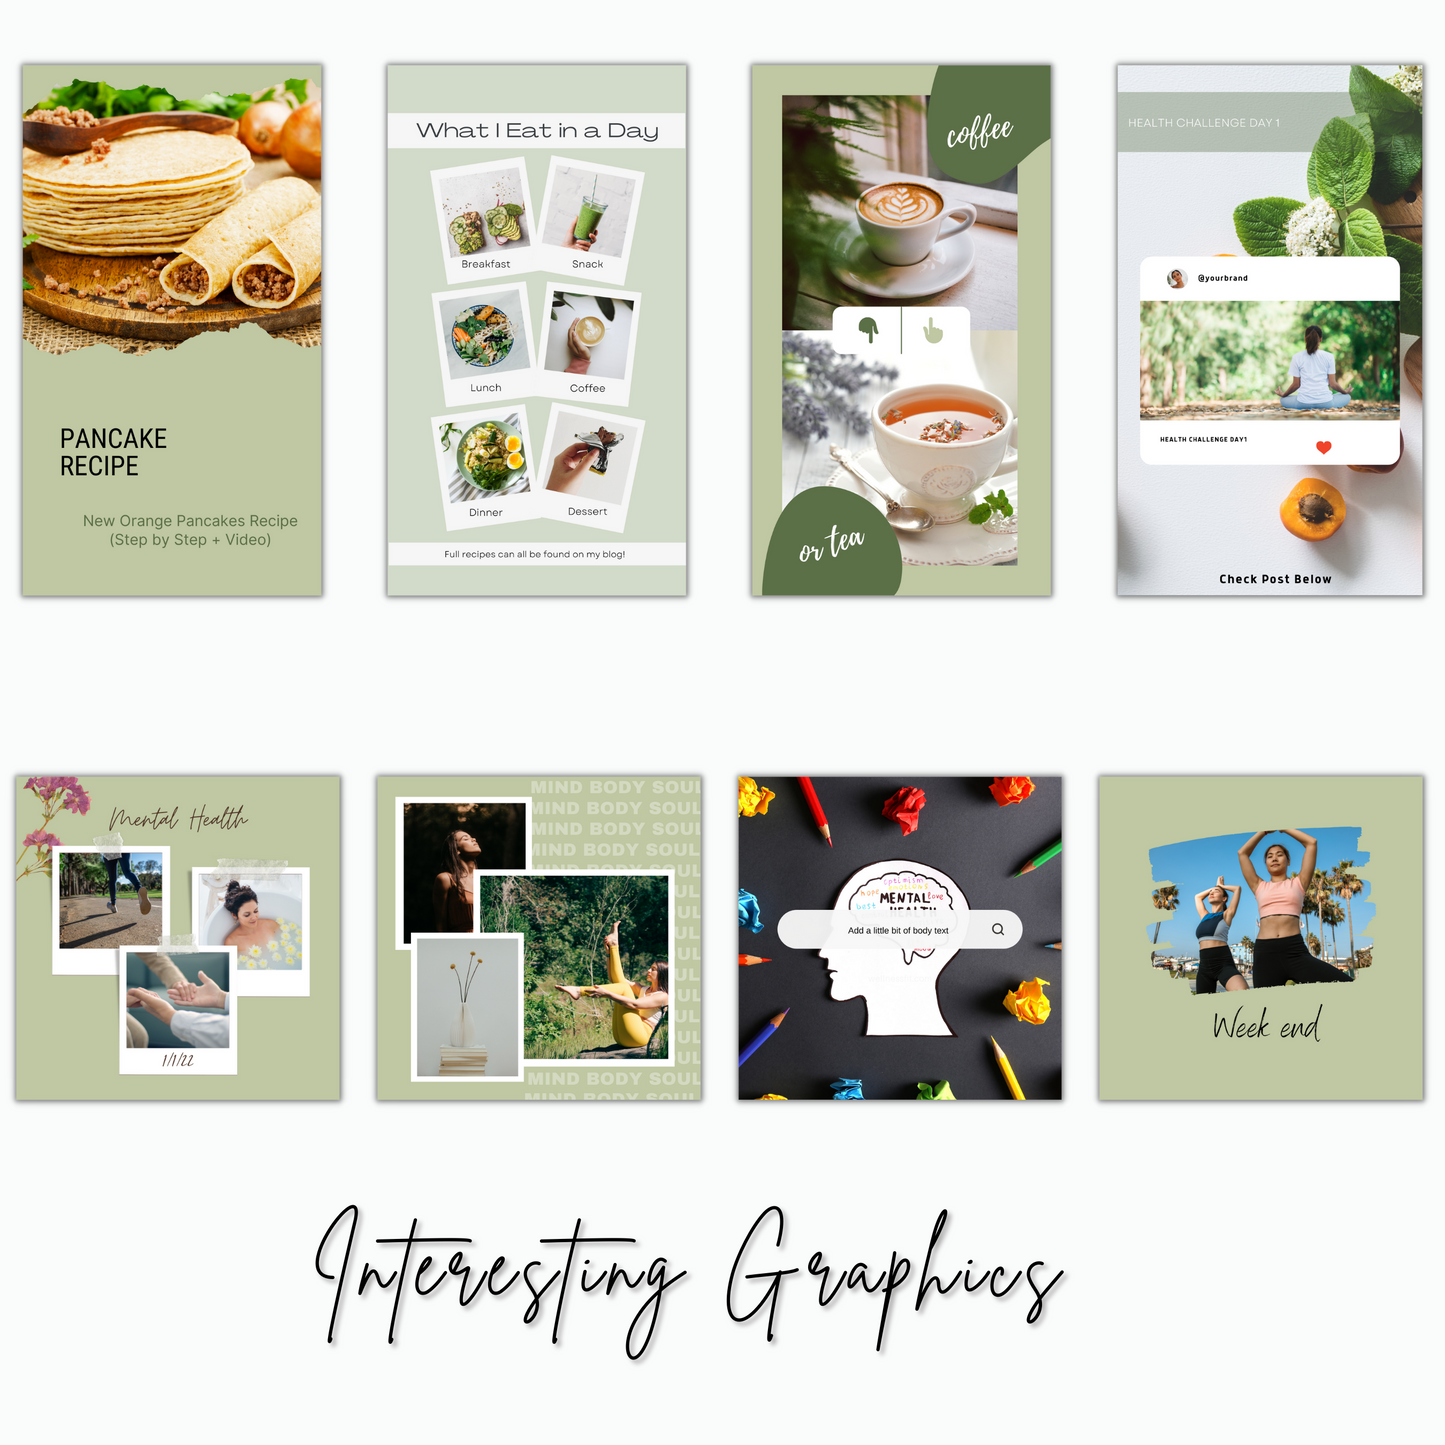 Health,Wellness,Nutrition and Fitness Coach Instagram Templates, Food Blogger instagram engagement posts, coaching, online course engagement